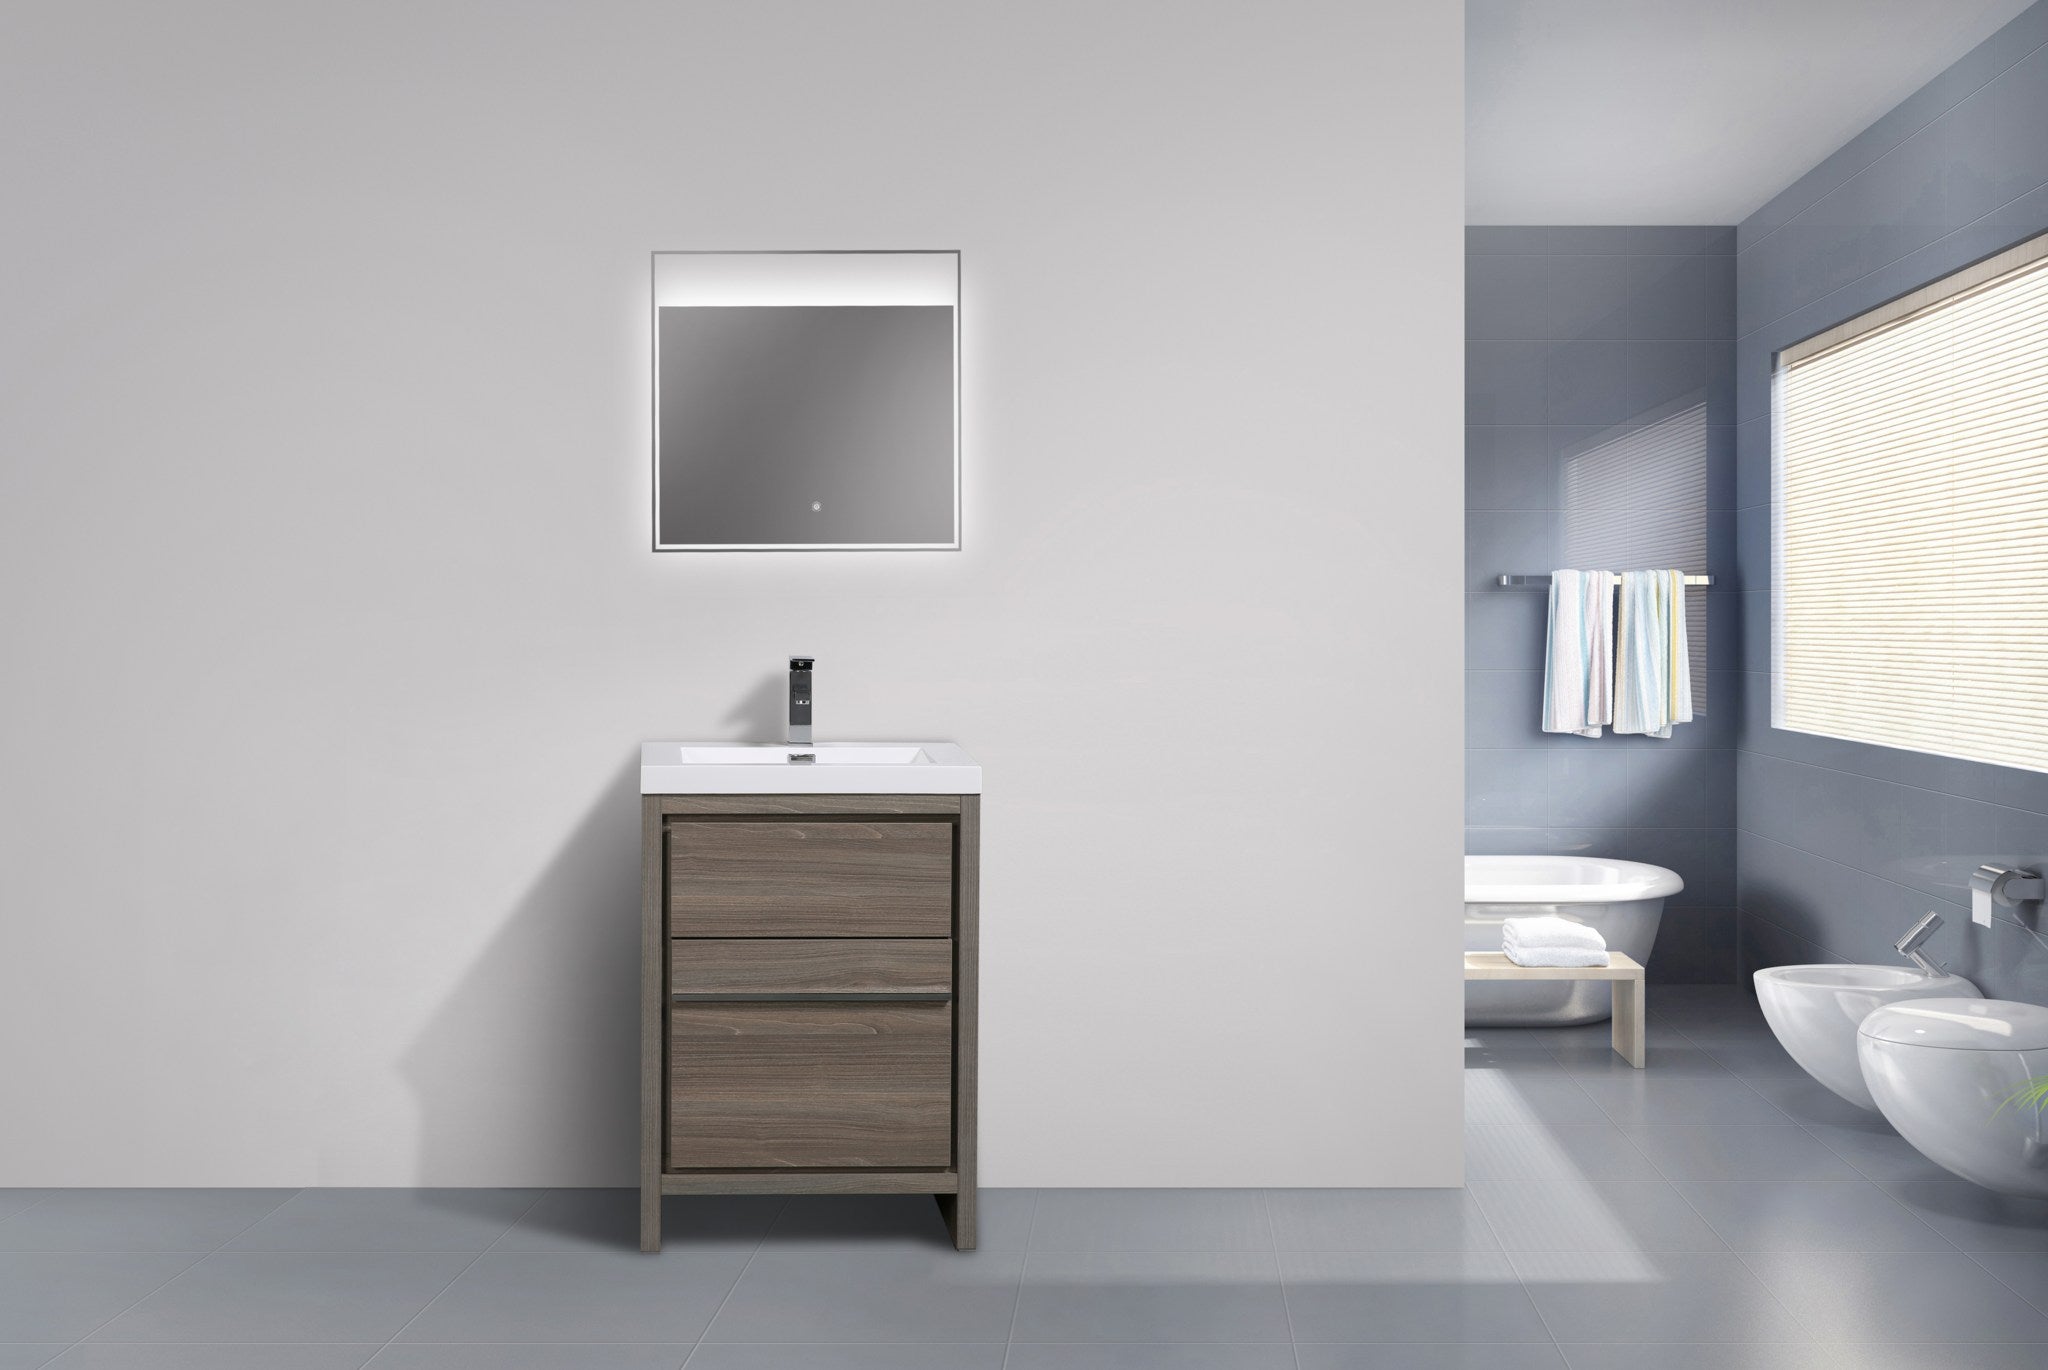 Granada 29.5 Maple Grey With Chrome Handle Cabinet, Square Cultured Marble Sink, Free Standing Modern Vanity Set